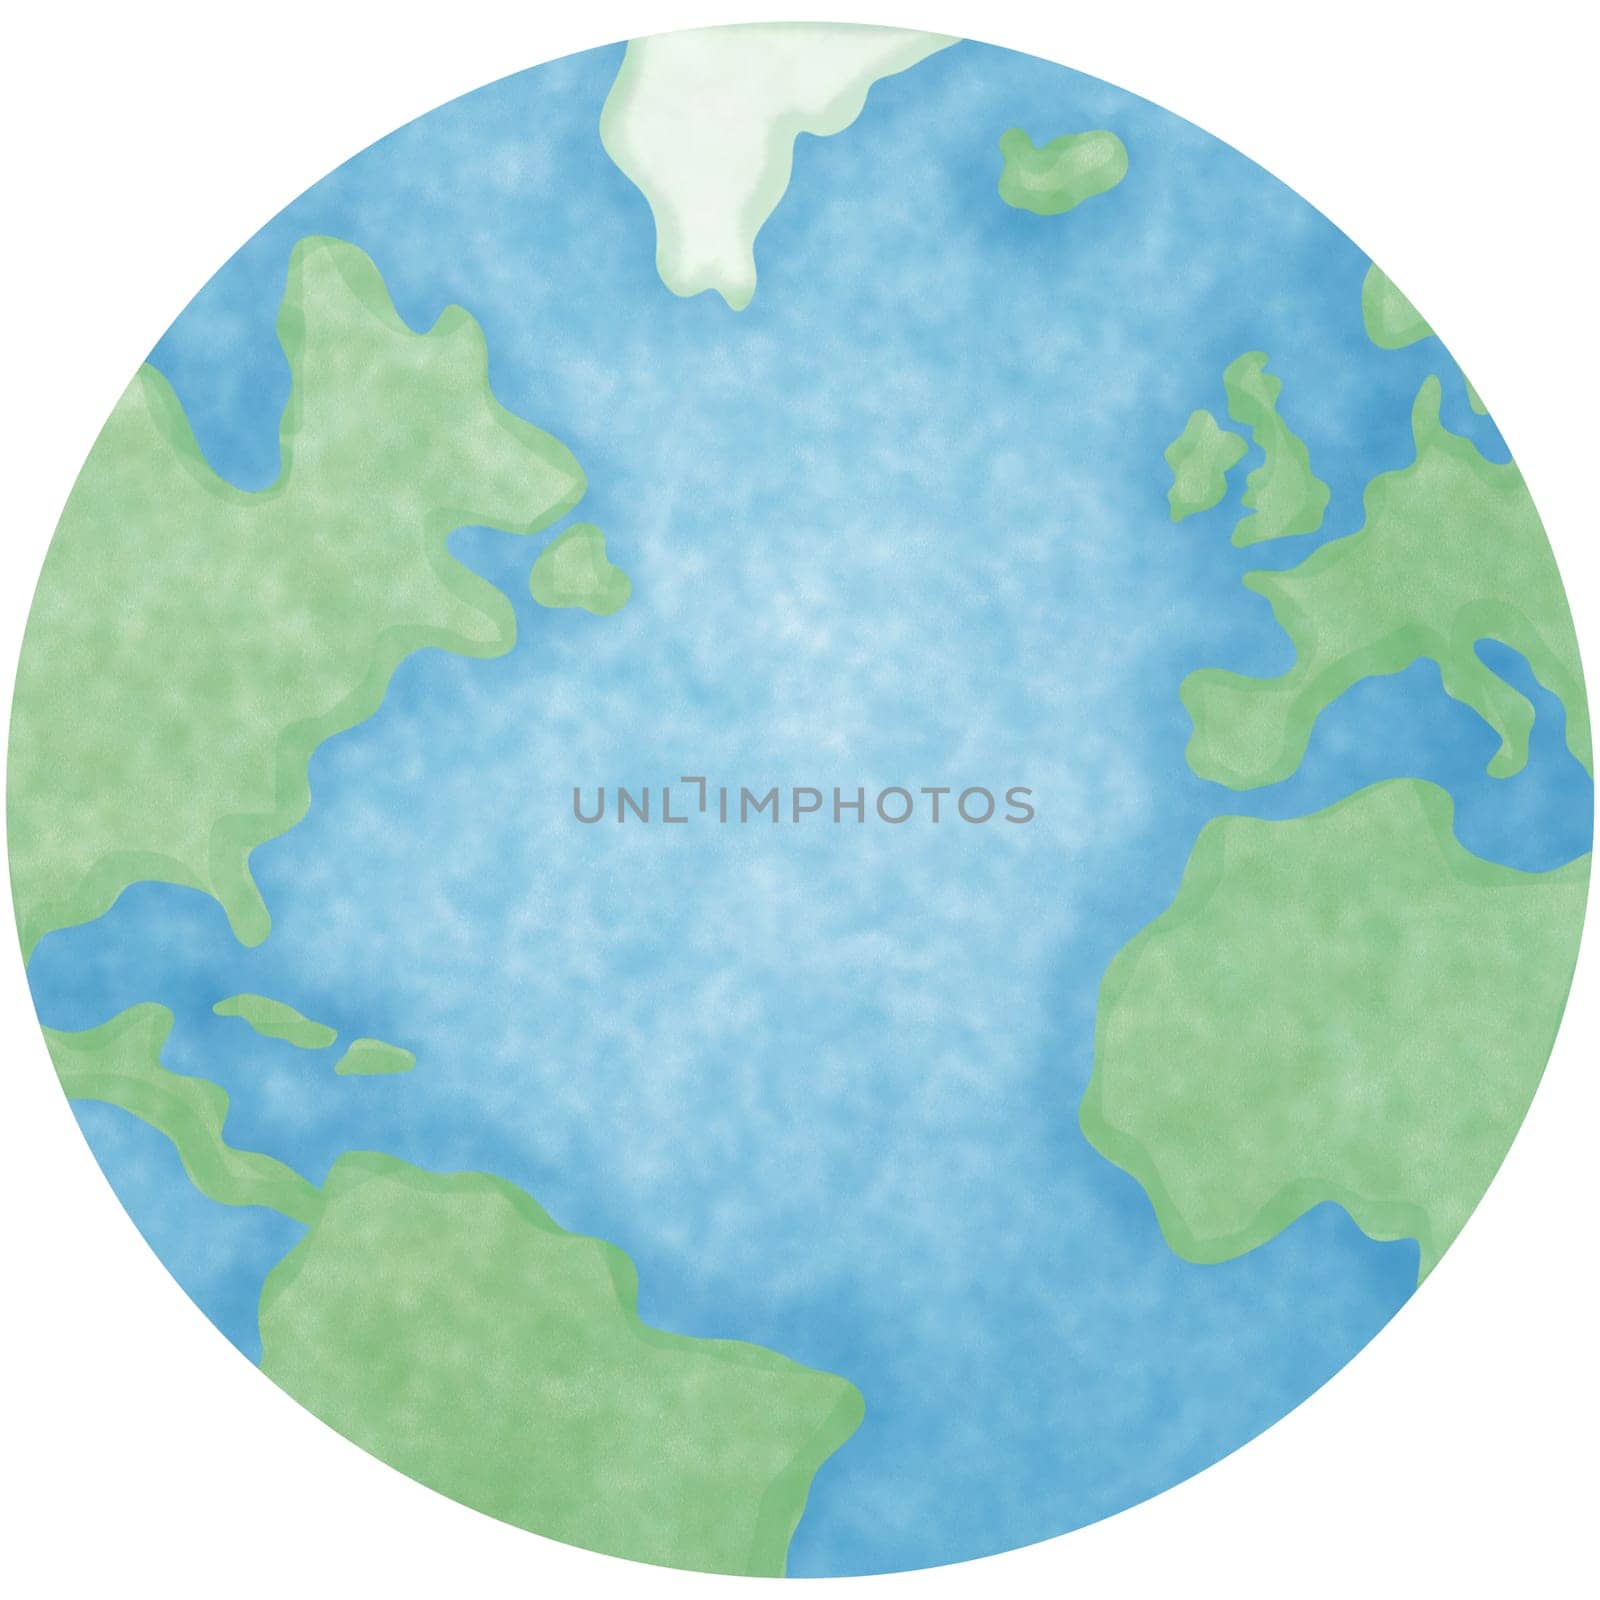 An illustration of a world map isolated on a white background provides a clear and visually appealing representation of global geography